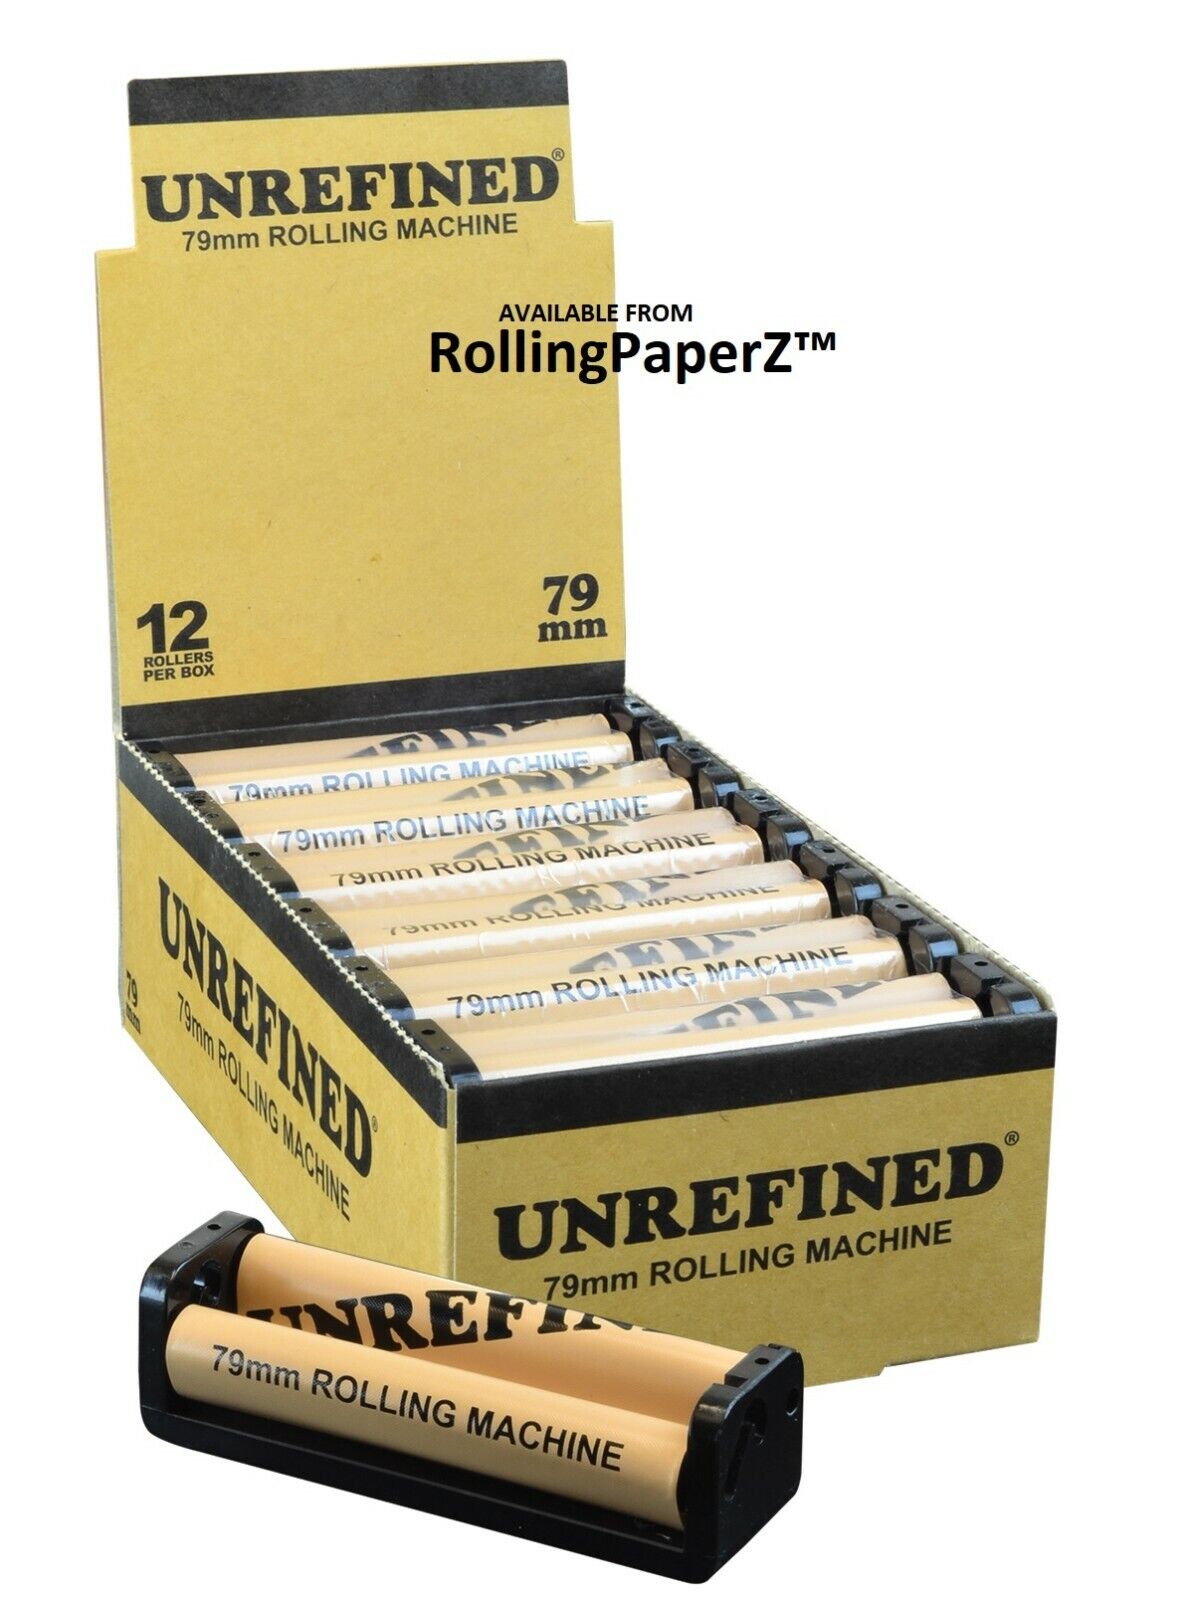 Buy TWO UNREFINED 79mm Cigarette Rolling Machines w/ instructions